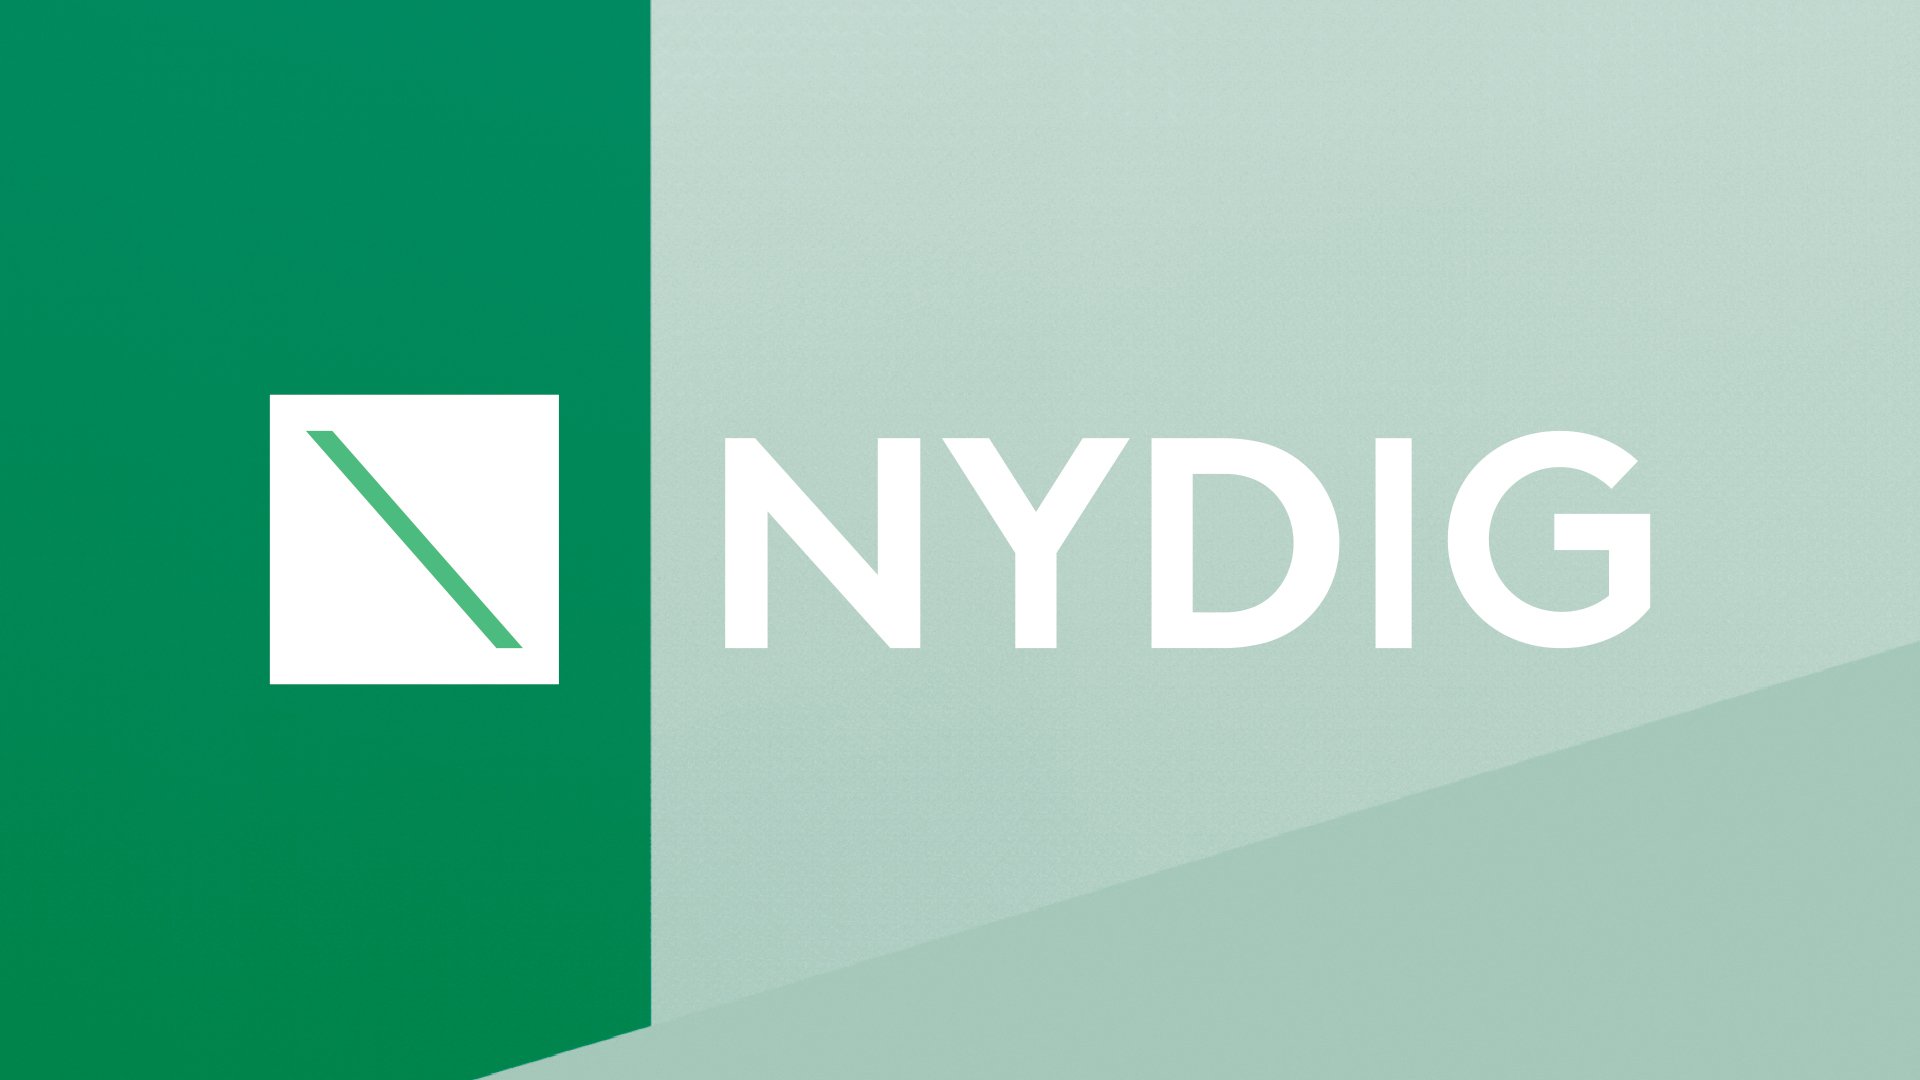 NYDIG expands its play to bridge bitcoin and banking with new partnerships